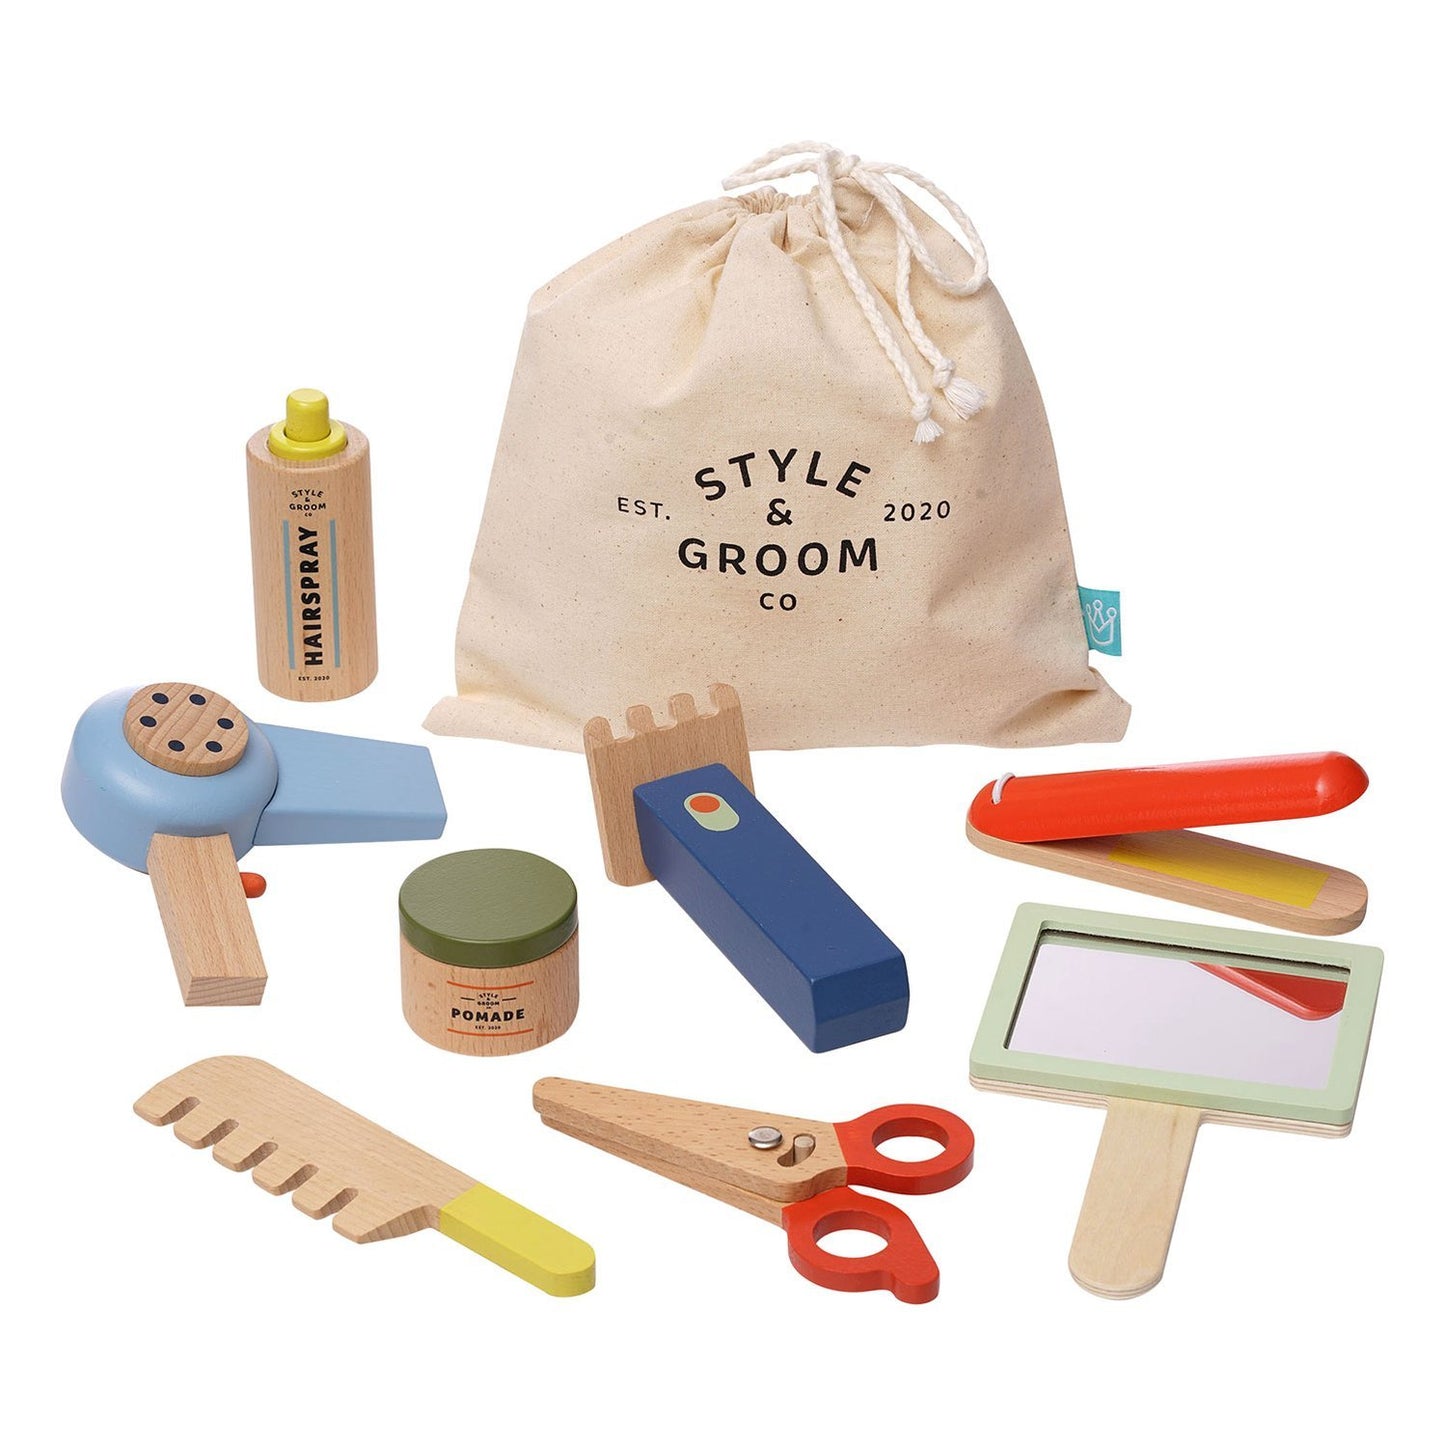 Style & Groom Hairdressing Set by Manhattan Toys - Wood Wood Toys Canada's Favourite Montessori Toy Store